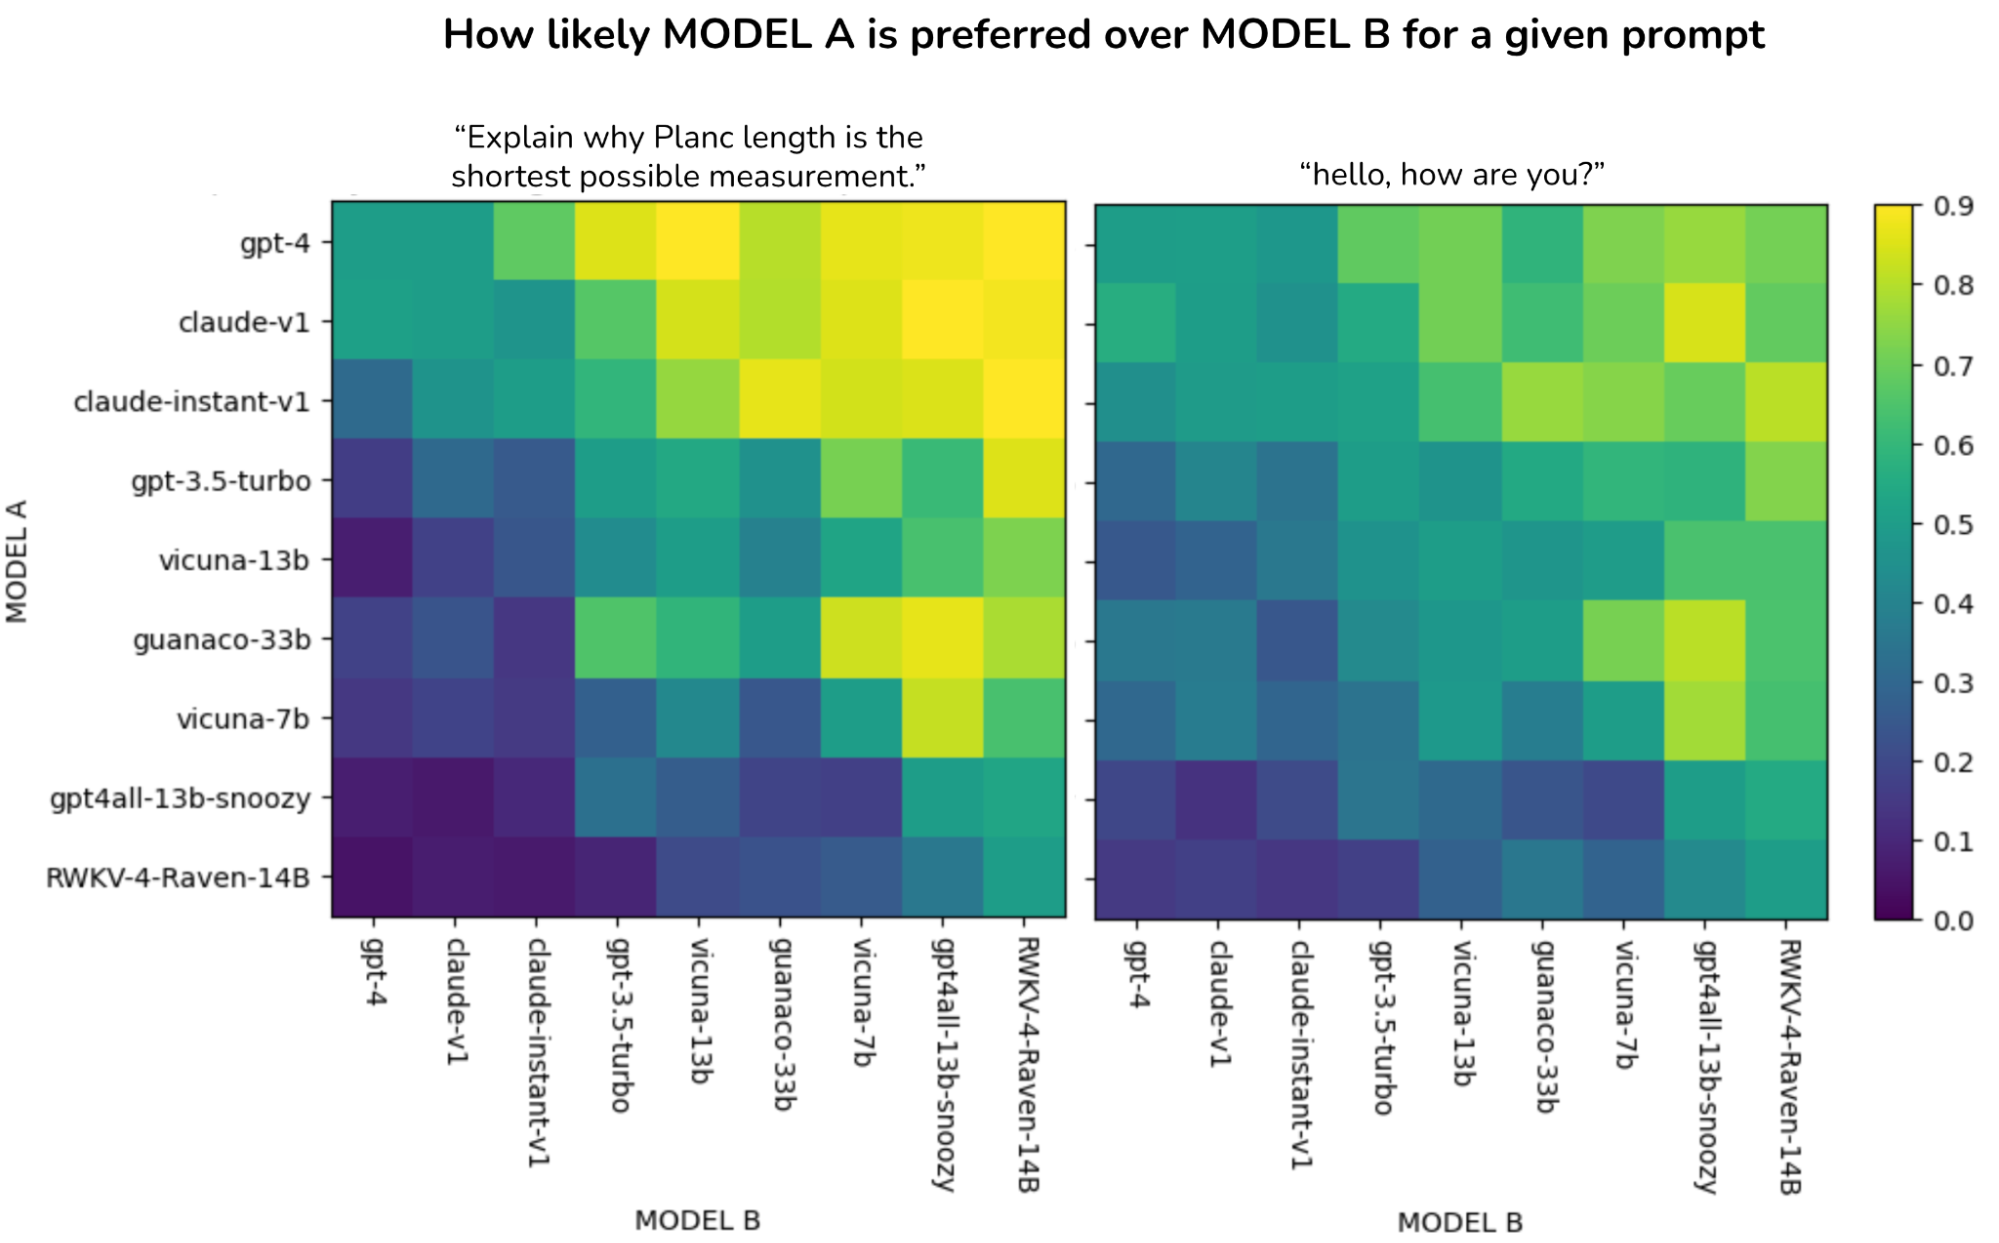 Predictive human preference for all LLM model pairs